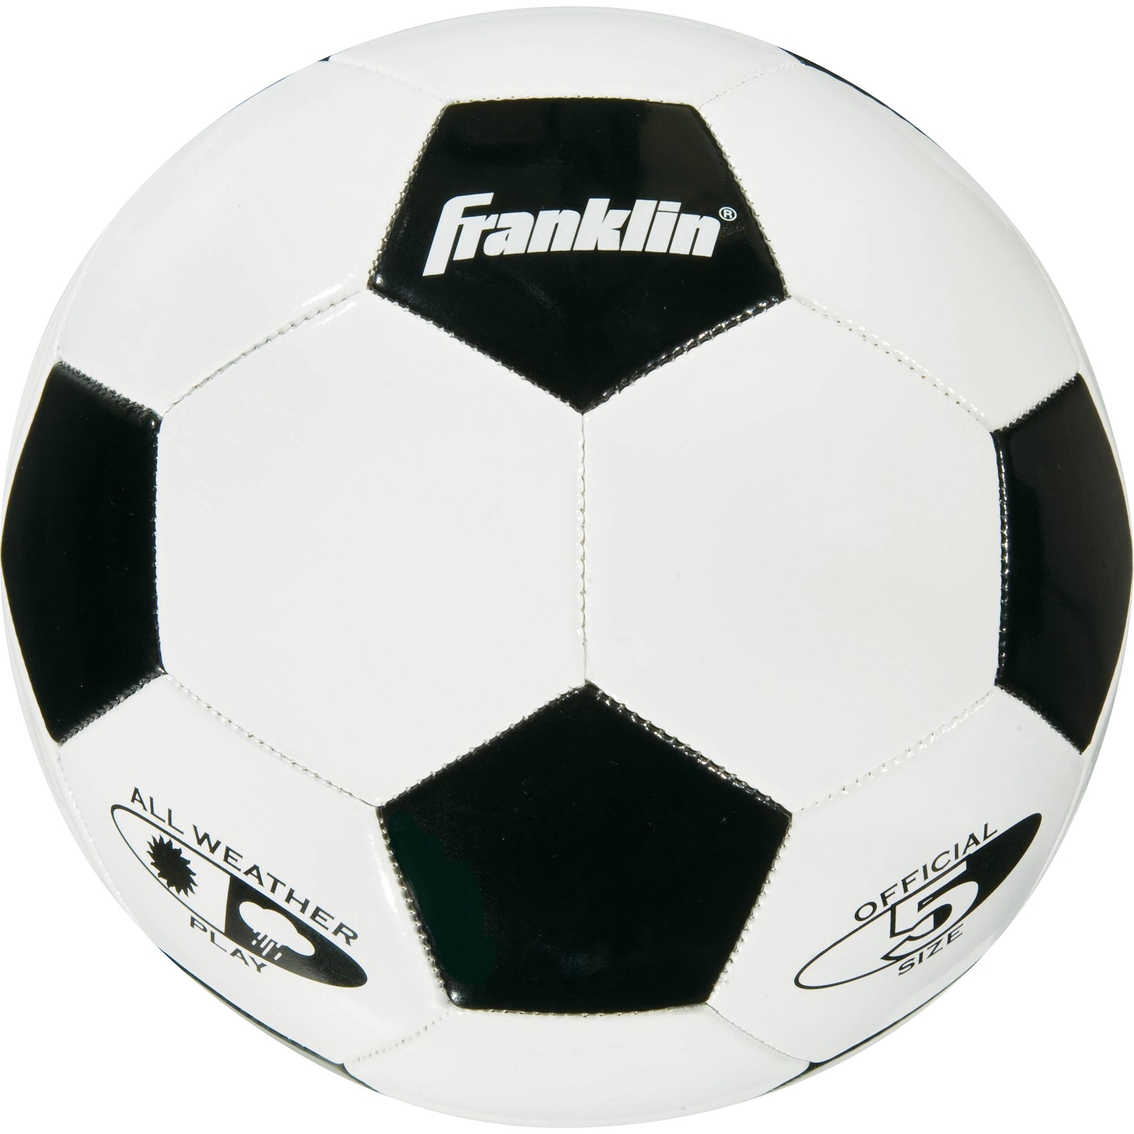 Details about   Anaconda Sports MG-MILO-2 NFHS Approved Soccerball-Black/White Size 5 2 lot 